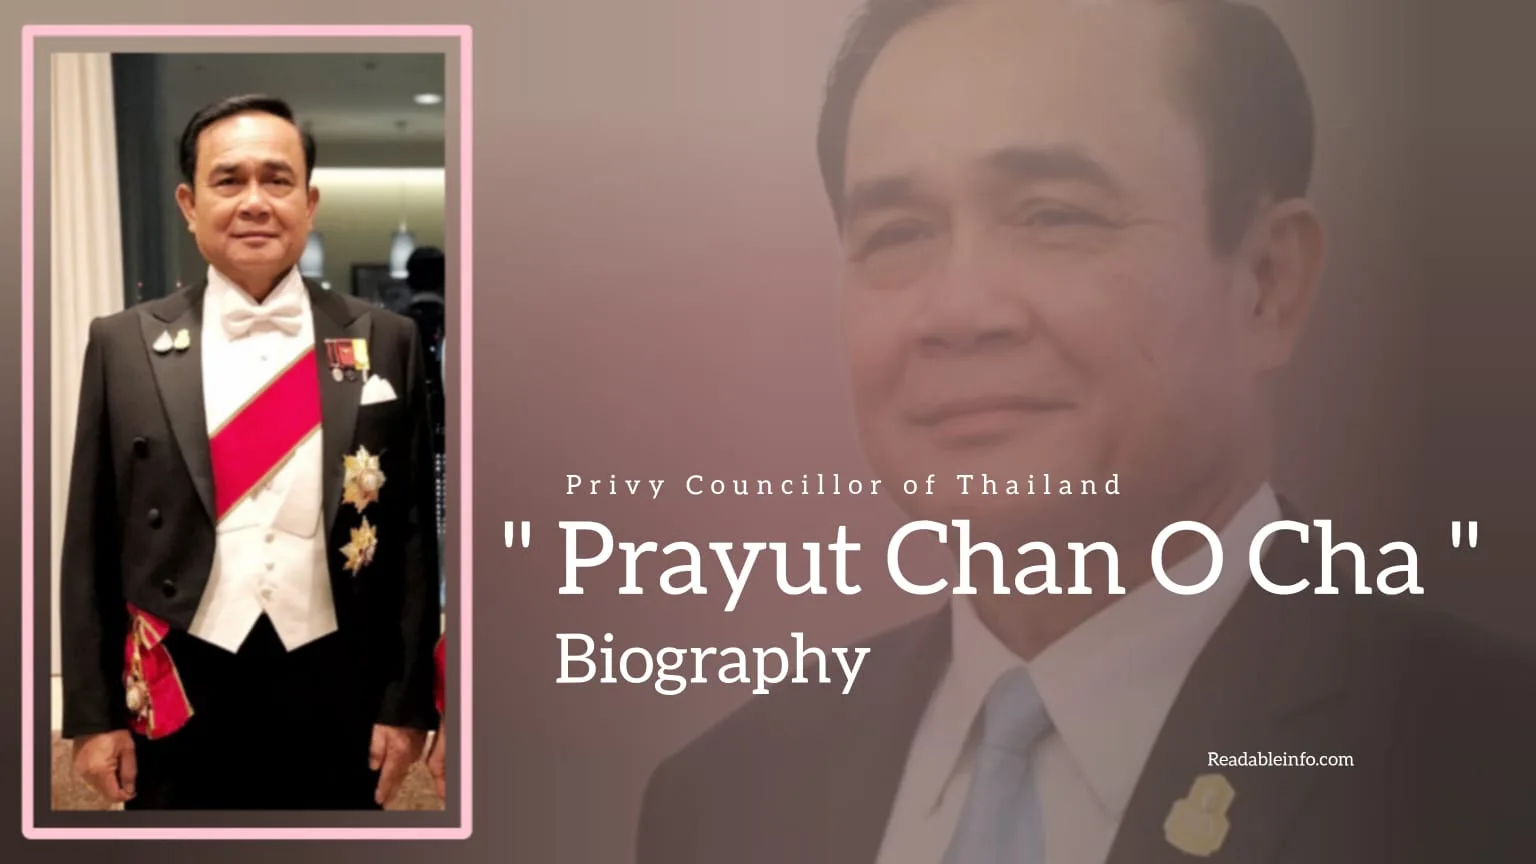 You are currently viewing Prayut Chan O Cha Biography (Privy Councillor of Thailand)